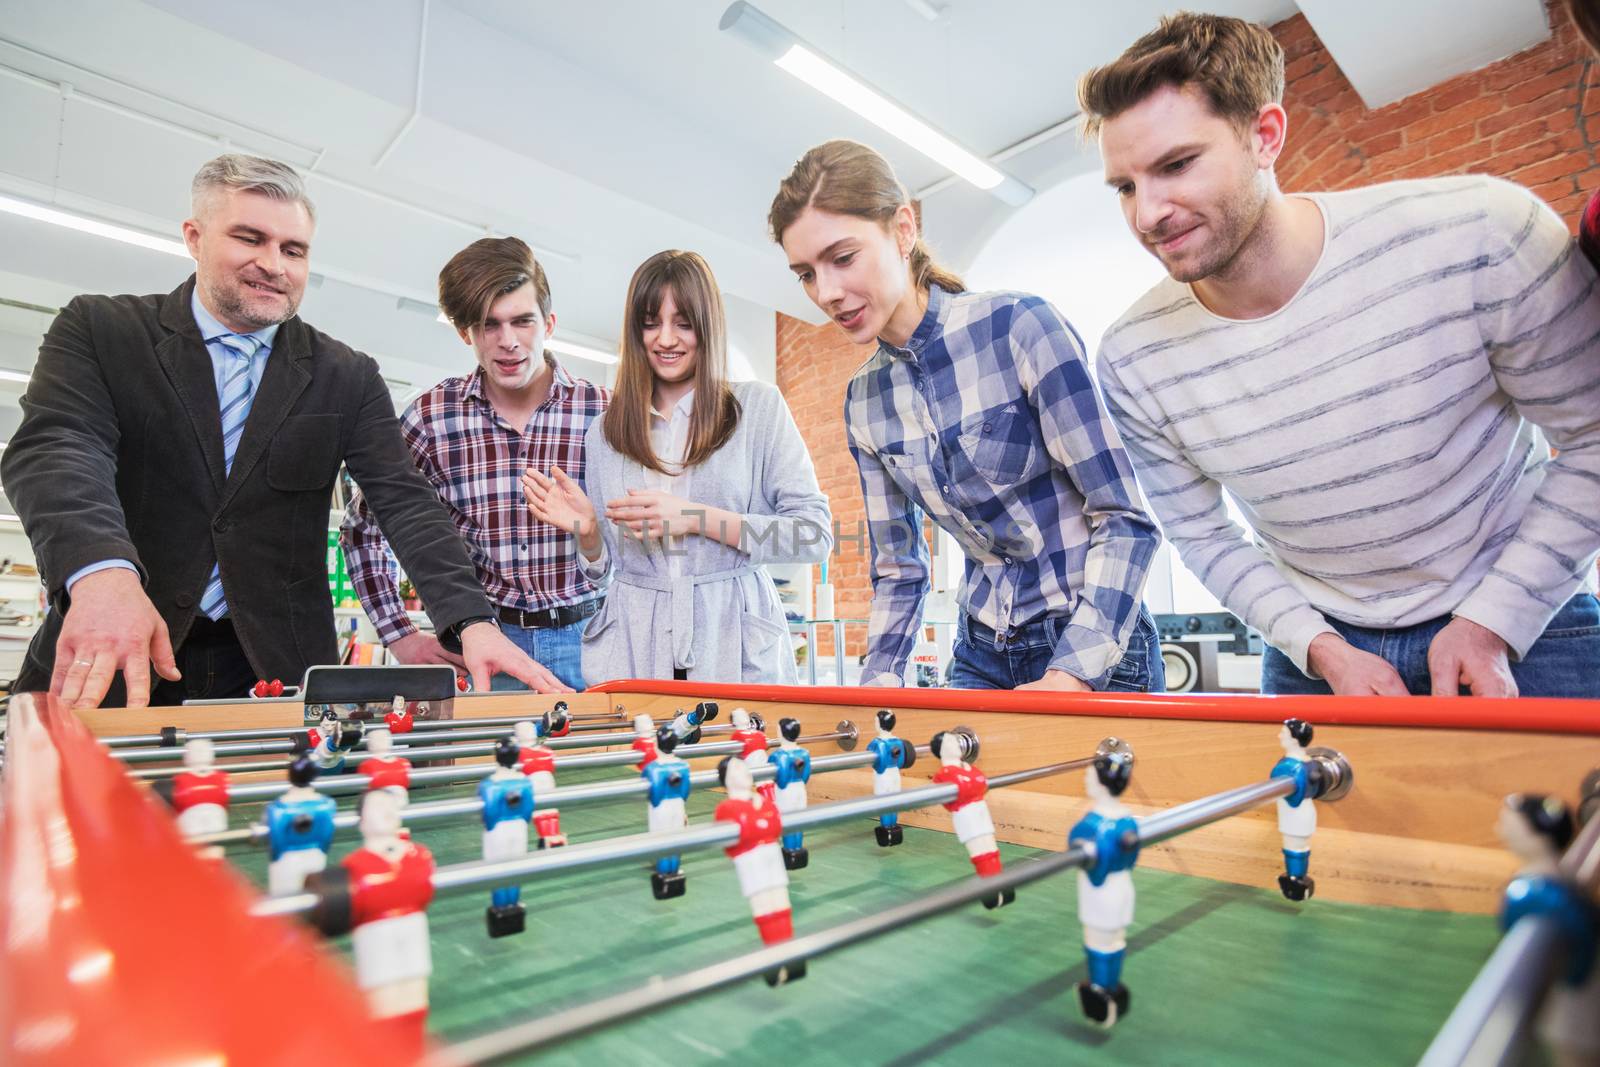 People playing table soccer by Yellowj